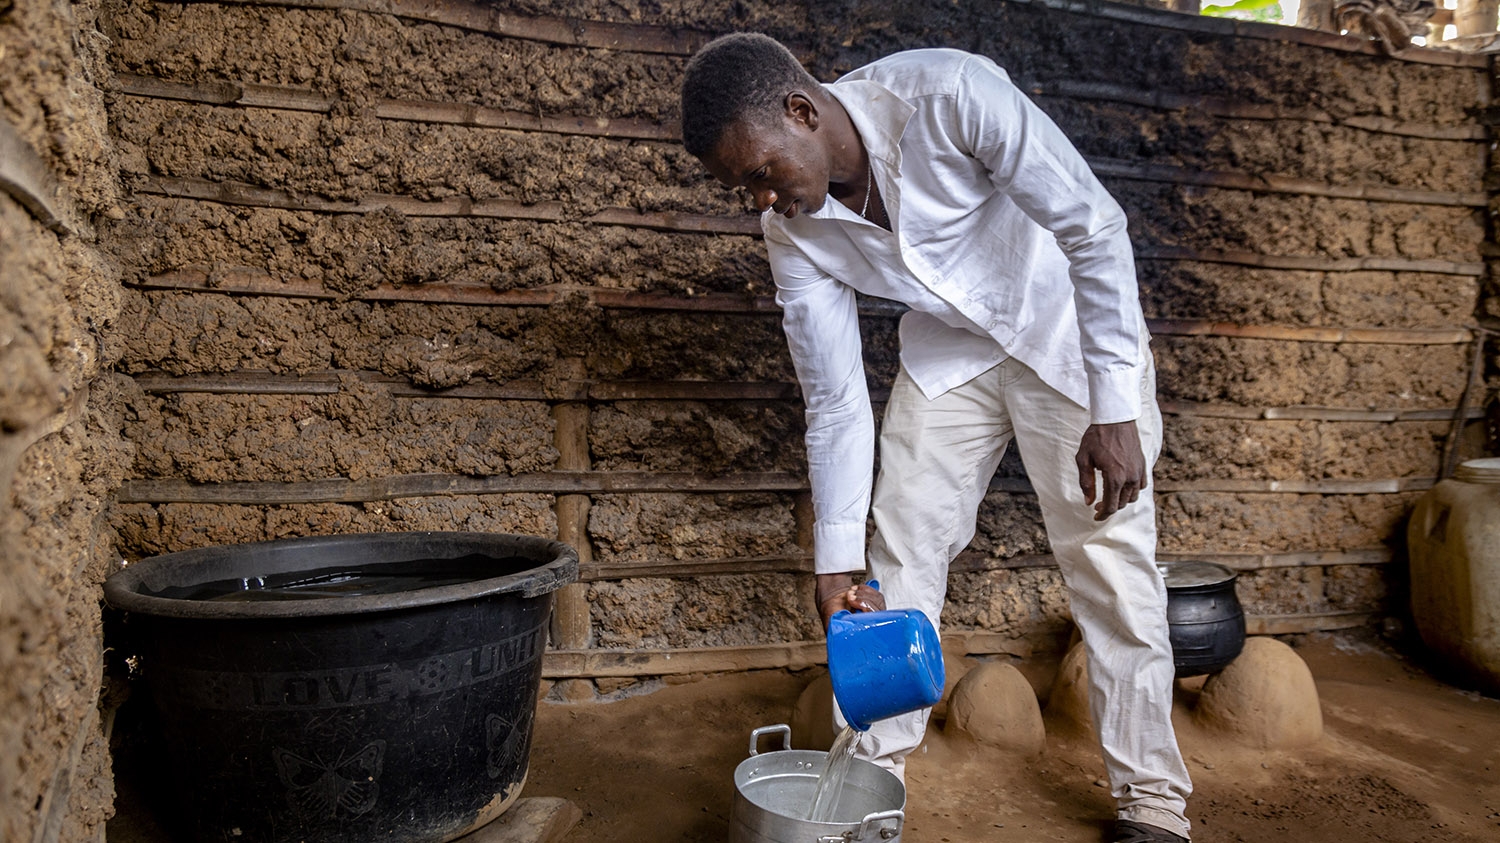 Godfred pours water into a pot at his home.